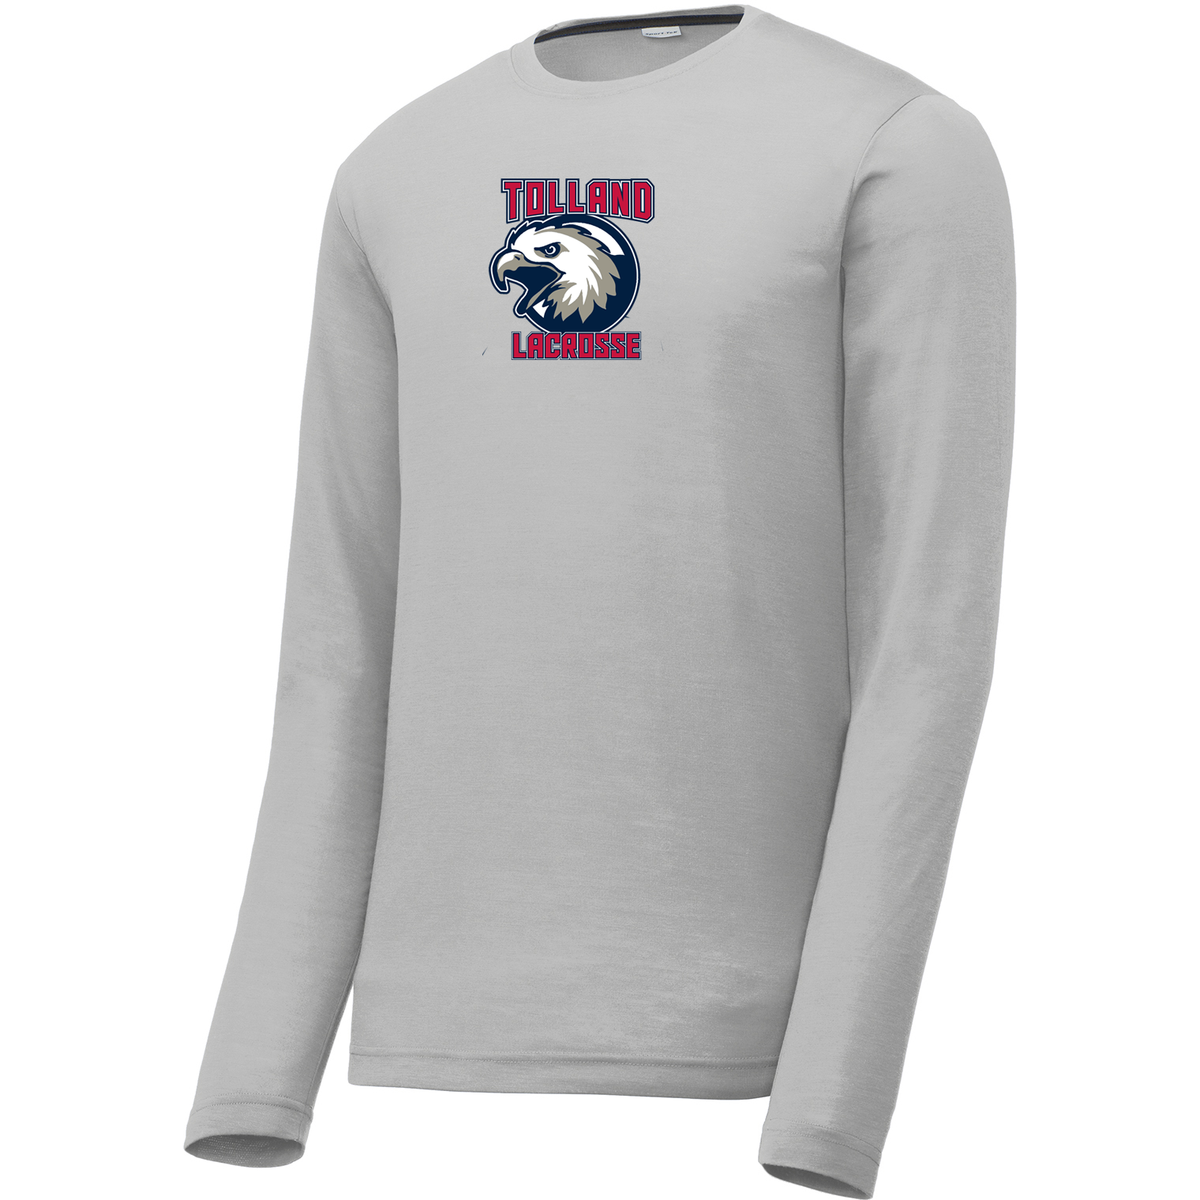 Tolland Lacrosse Club Long Sleeve CottonTouch Performance Shirt